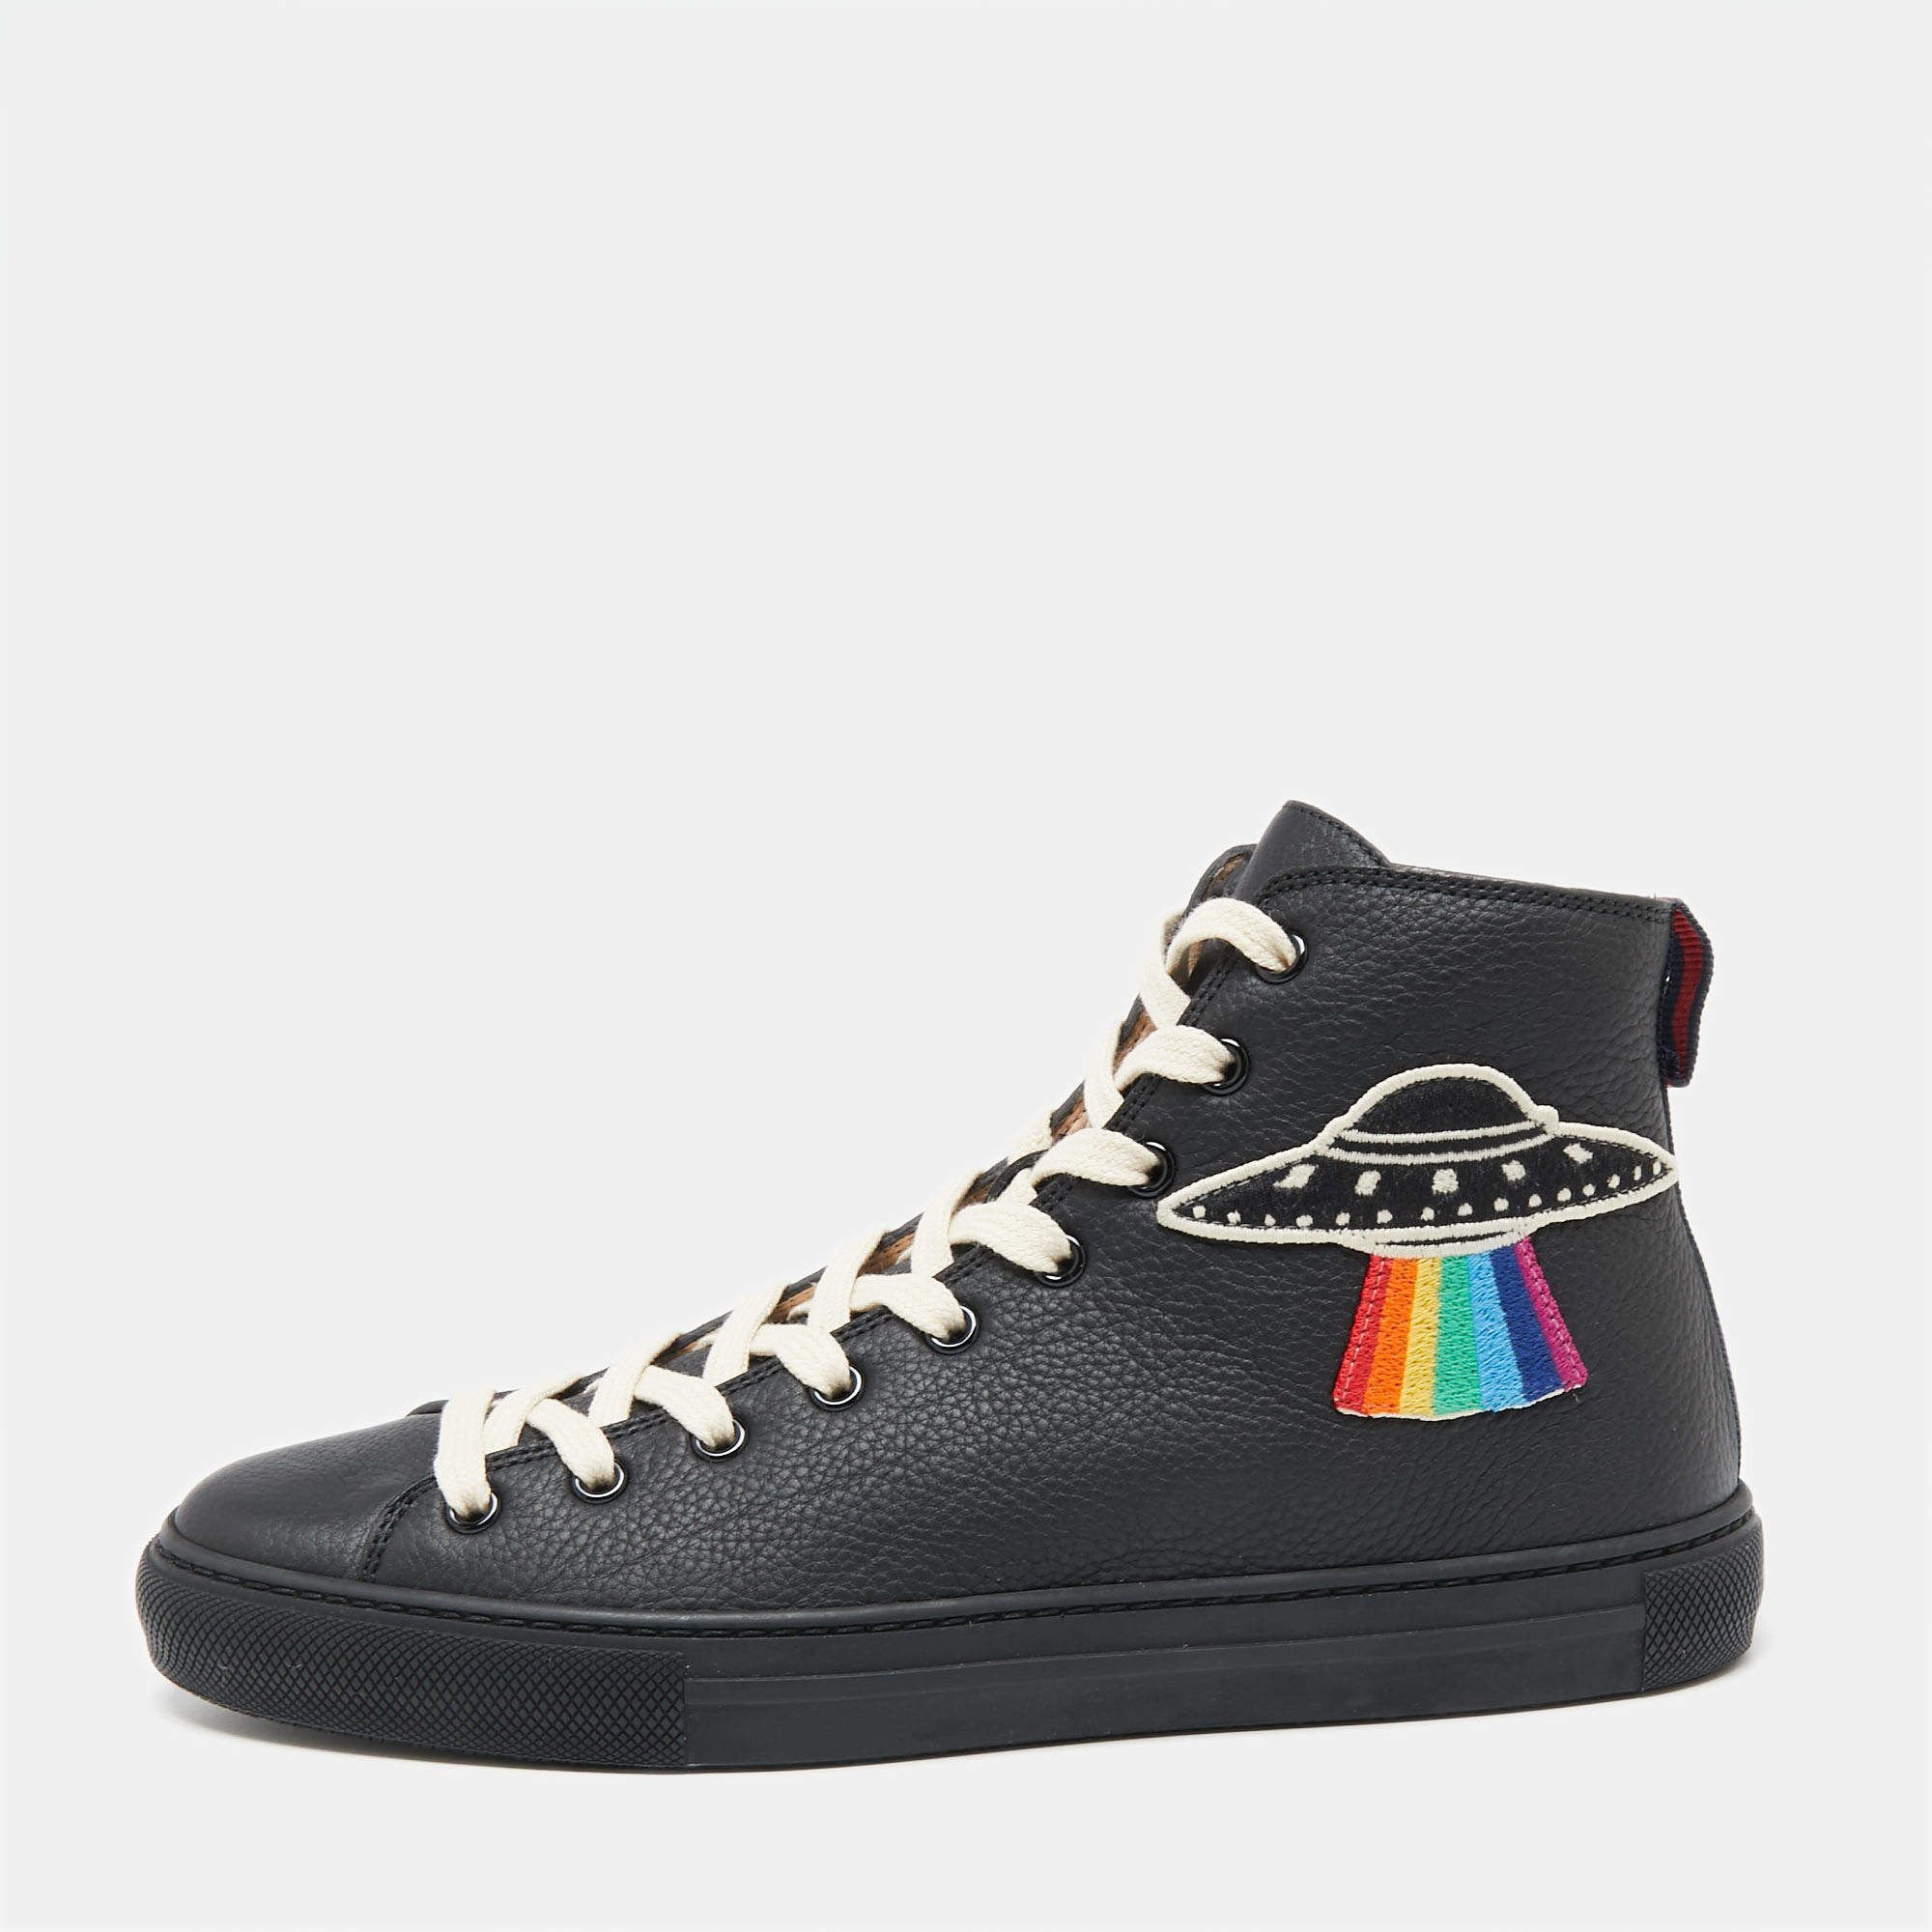 Gucci Black Leather High-Top Sneakers Size 40